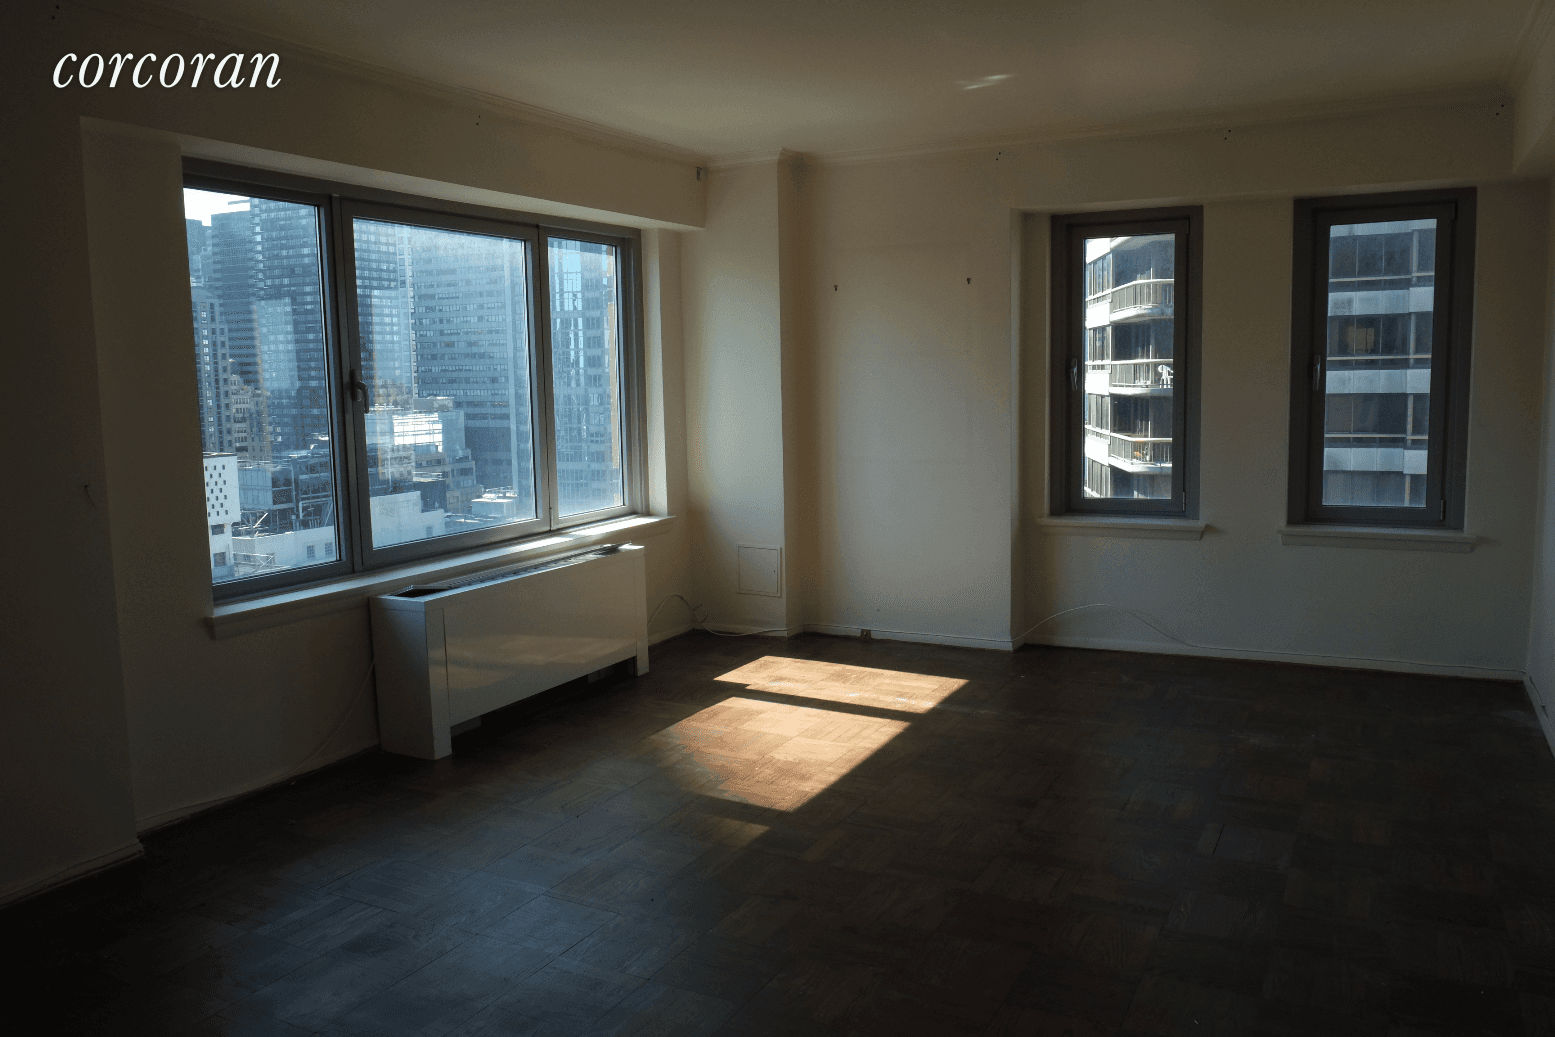 Estate Condition, Sponsor Apartment, 2, 536 square foot four bedroom, four and a half bathroom duplex with 9' ceilings being sold as is by sponsor.